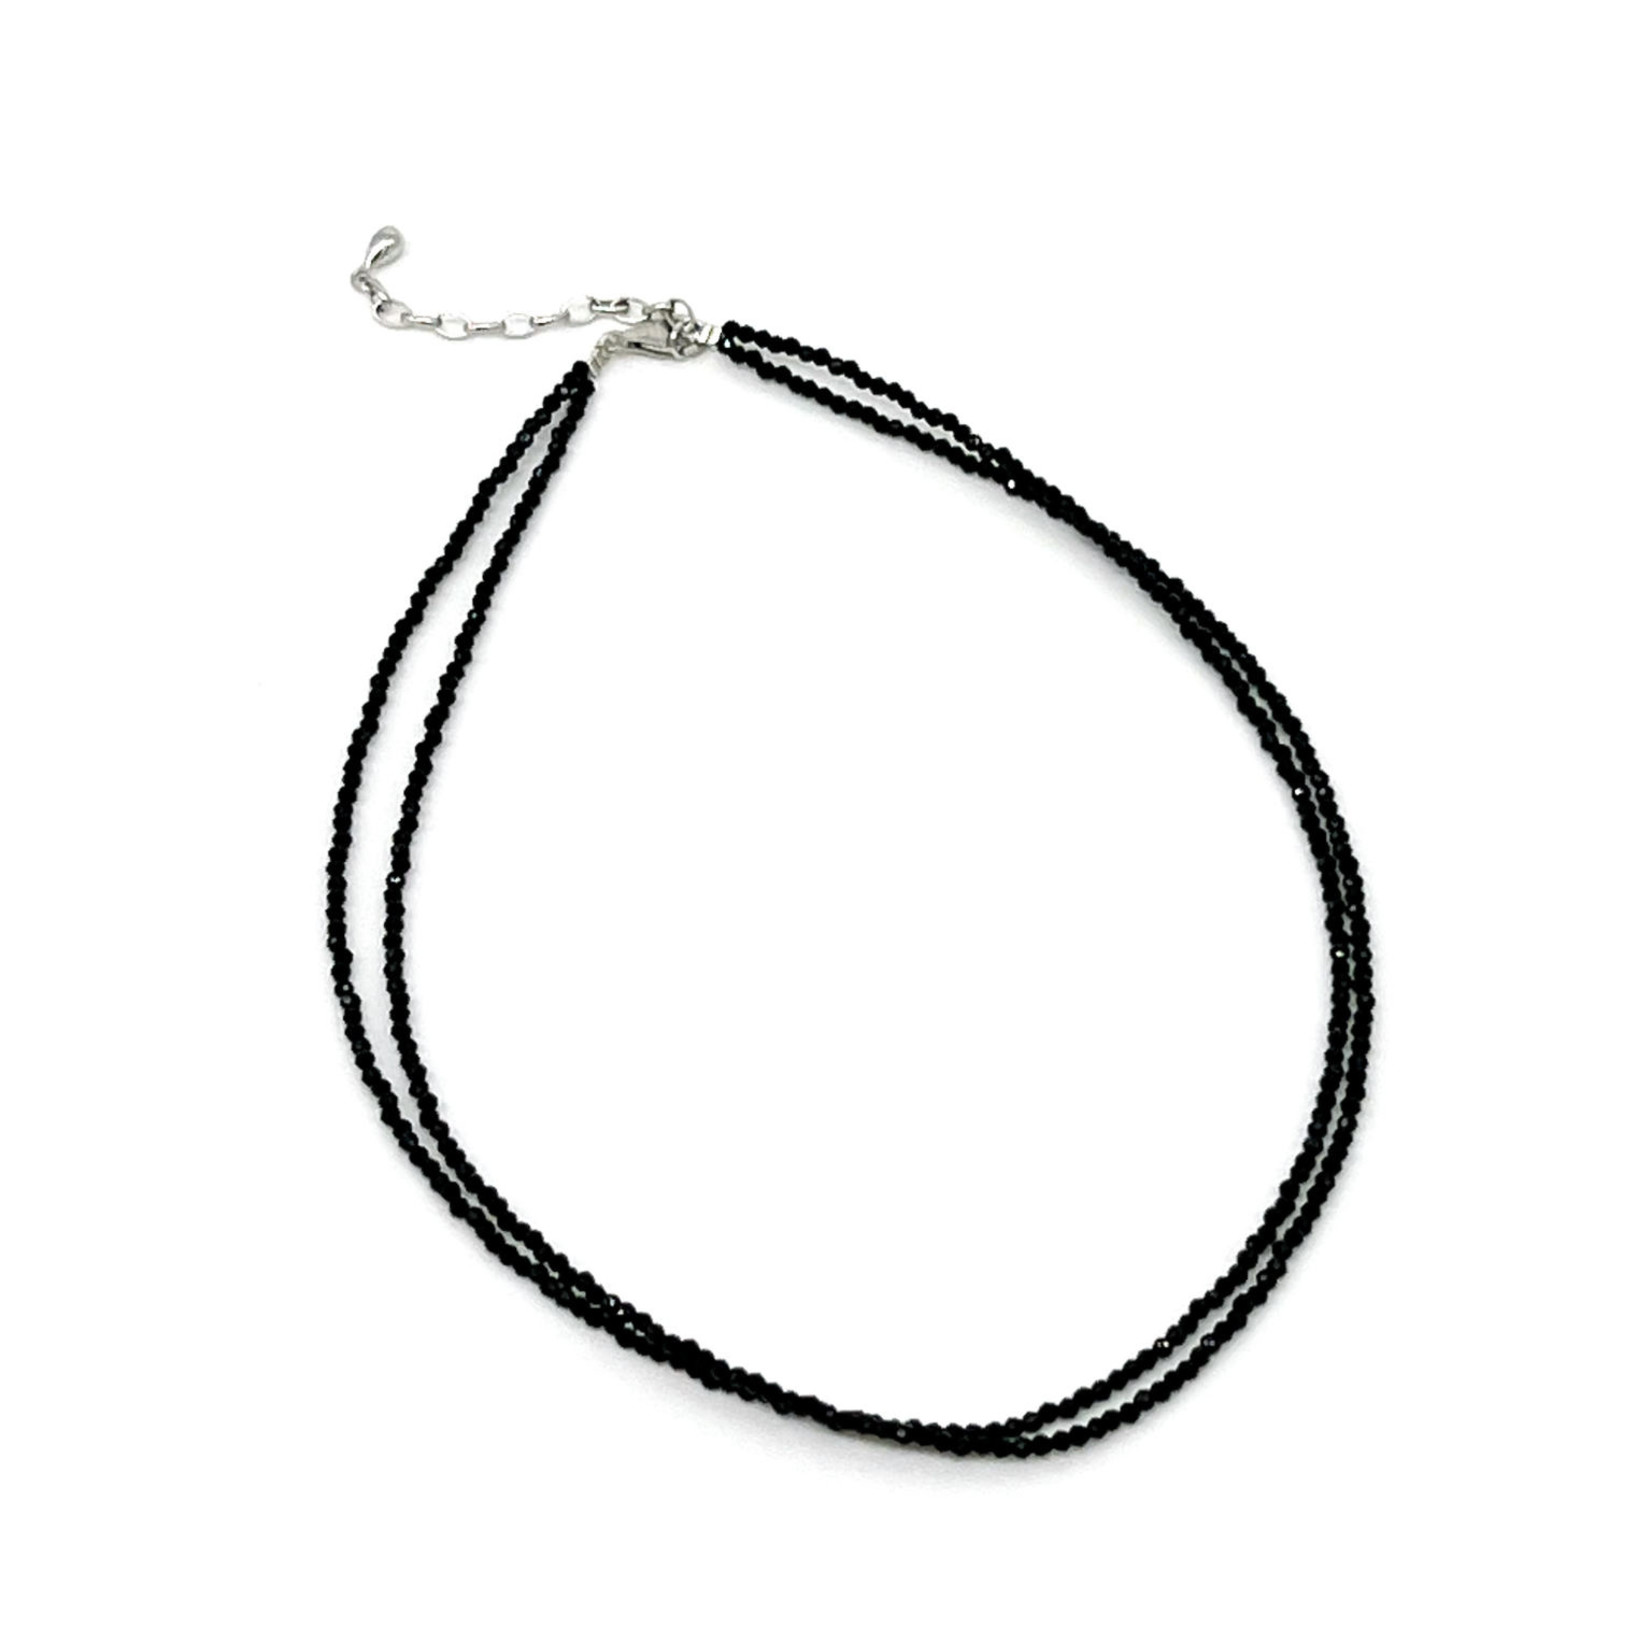 16-18” 2mm Double Strand Black Spinel Necklace